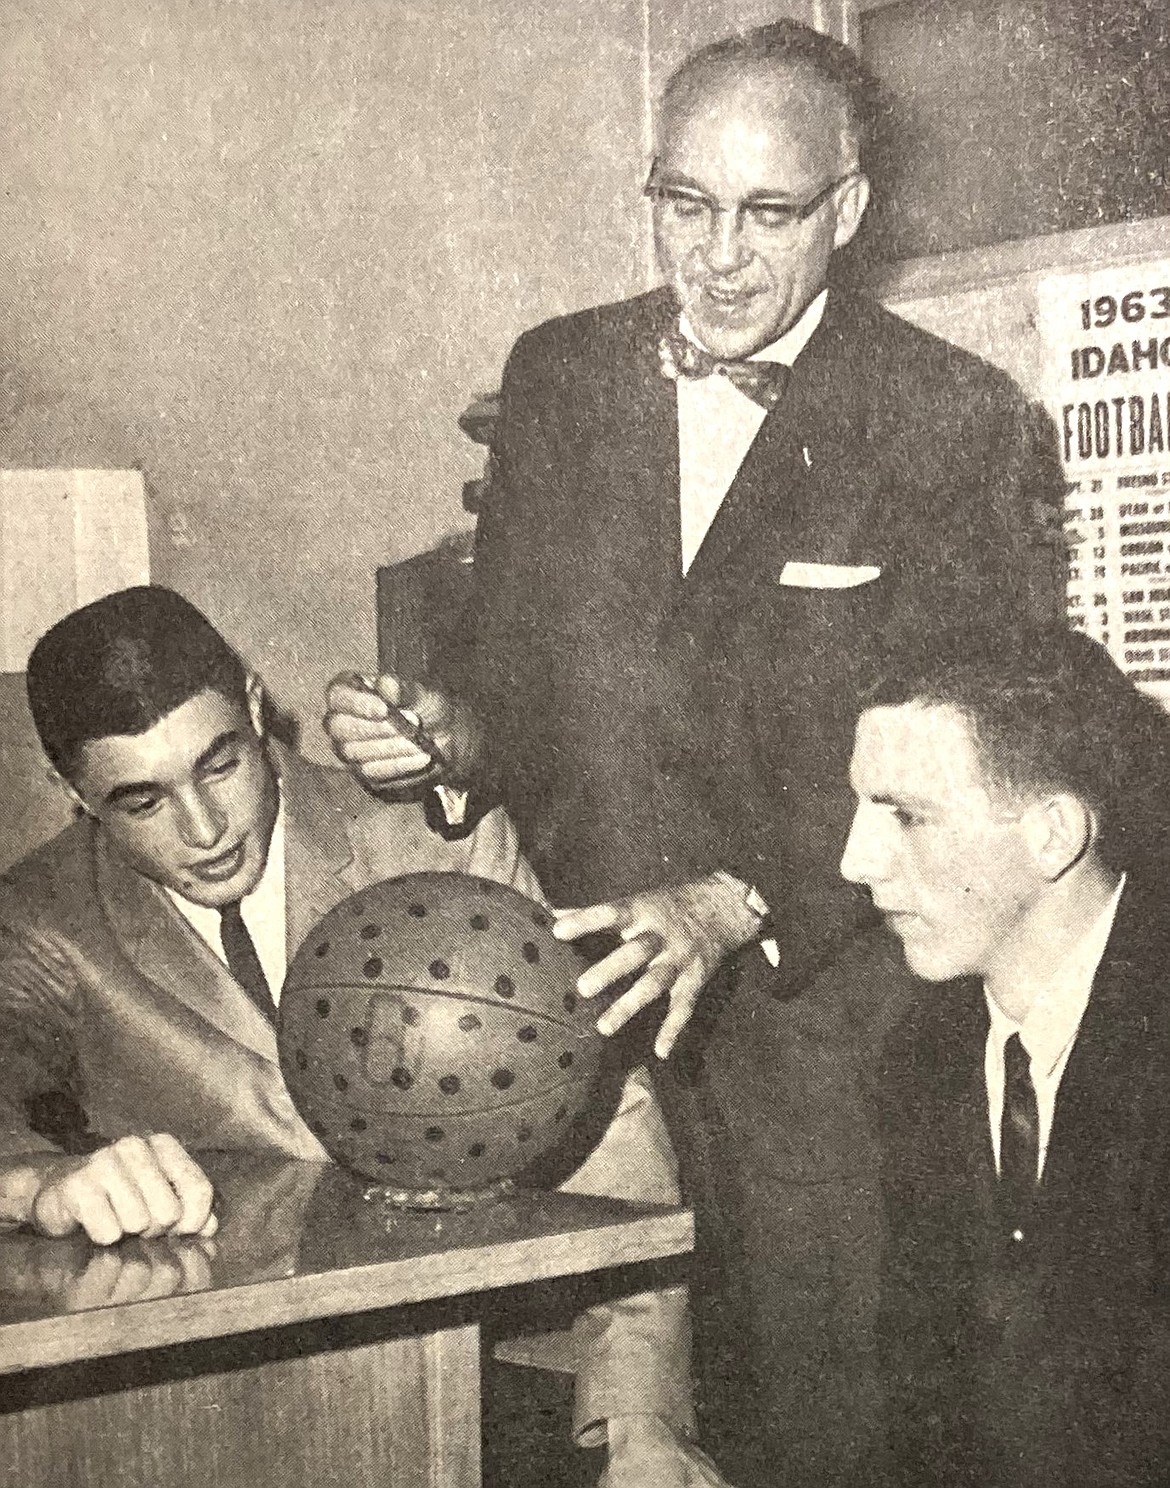 In January 1964, Dr. “Ted” Fox pretended to inoculate a spot-marked basketball against measles as CHS Viks Bob Pegg, left, and Don Barnes watched.